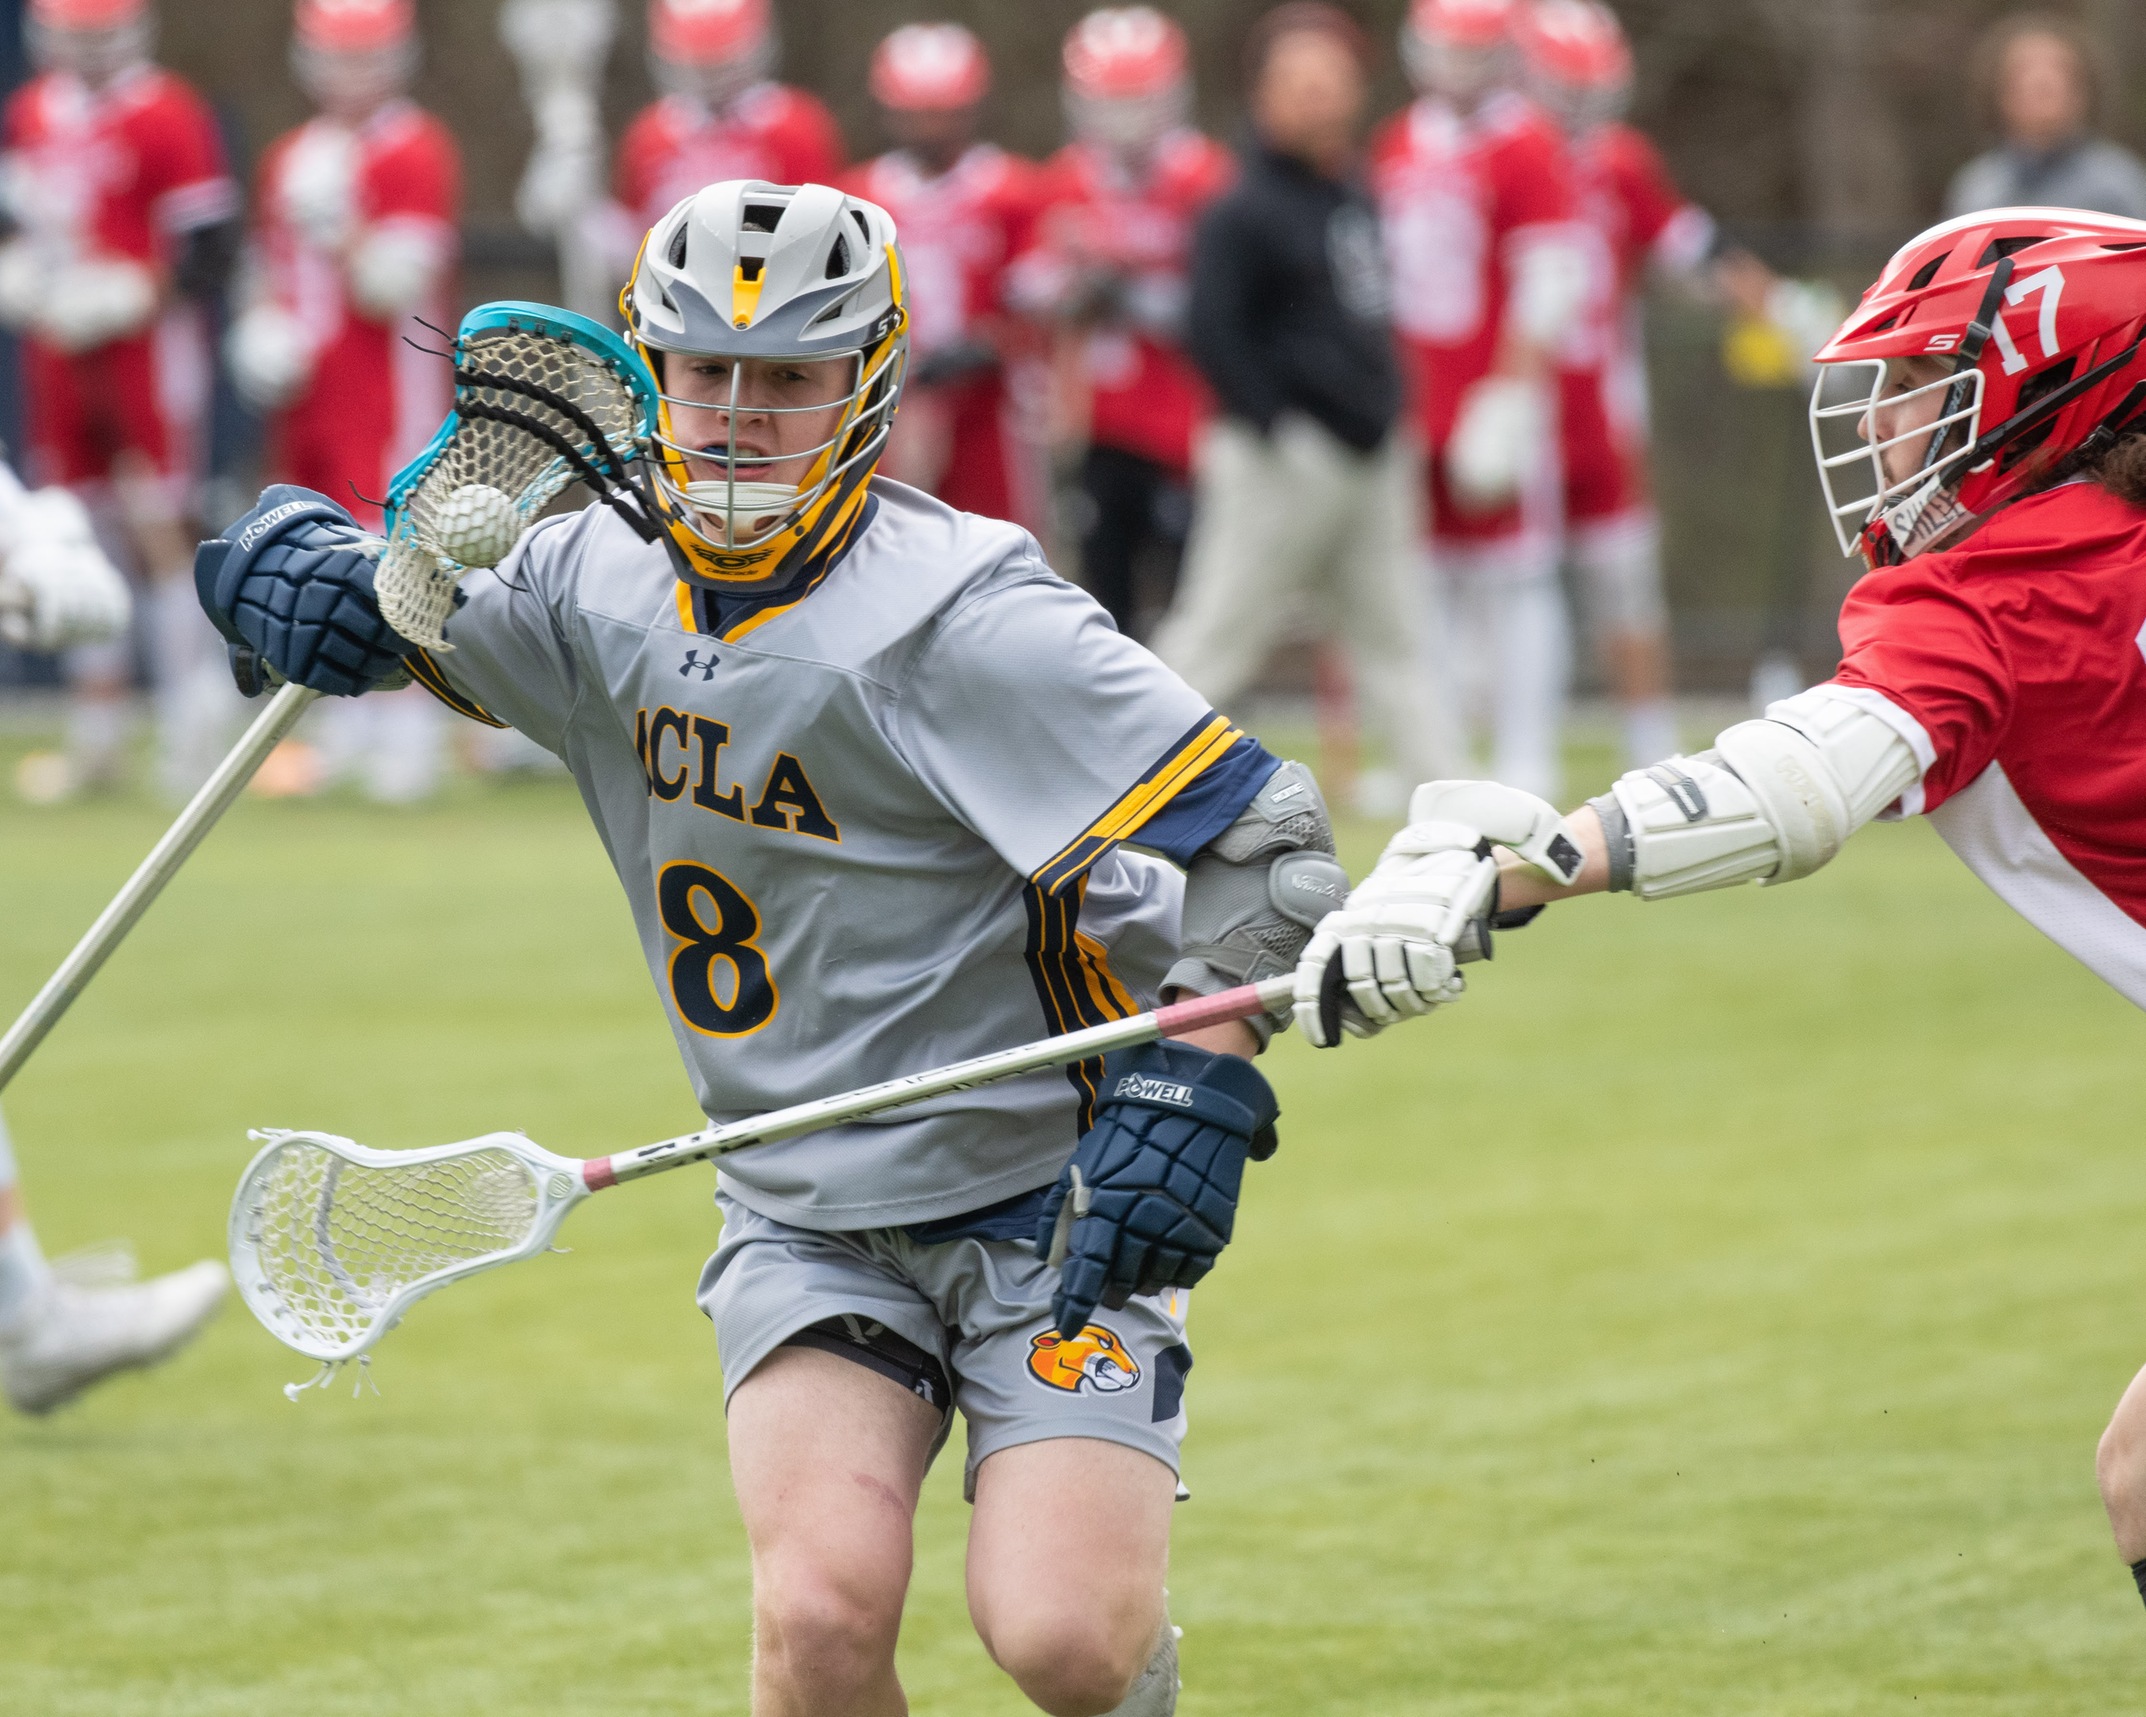 Haley's eight goal performance leads Men's Lacrosse to 15-9 win over Thomas in season finale